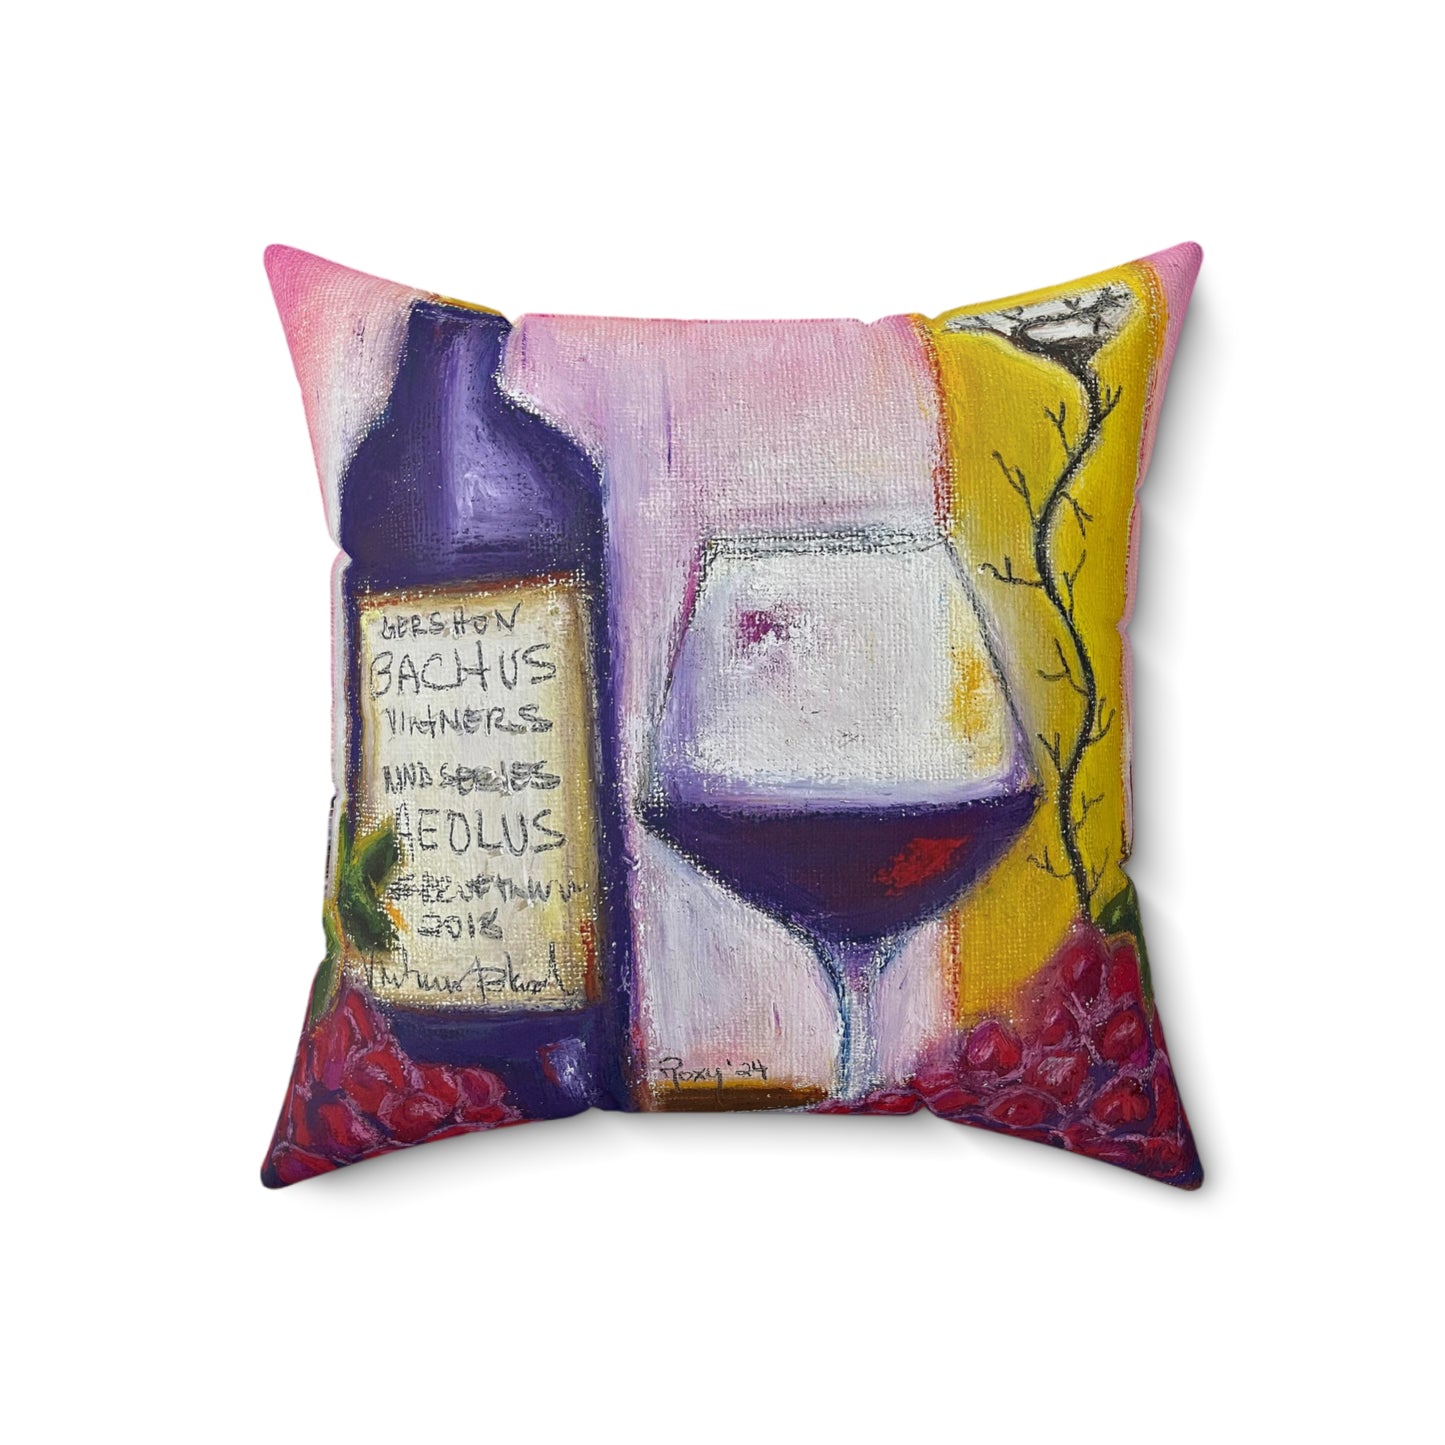 Aeolus GBV Wine and Clique Glass Indoor Spun Polyester Square Pillow